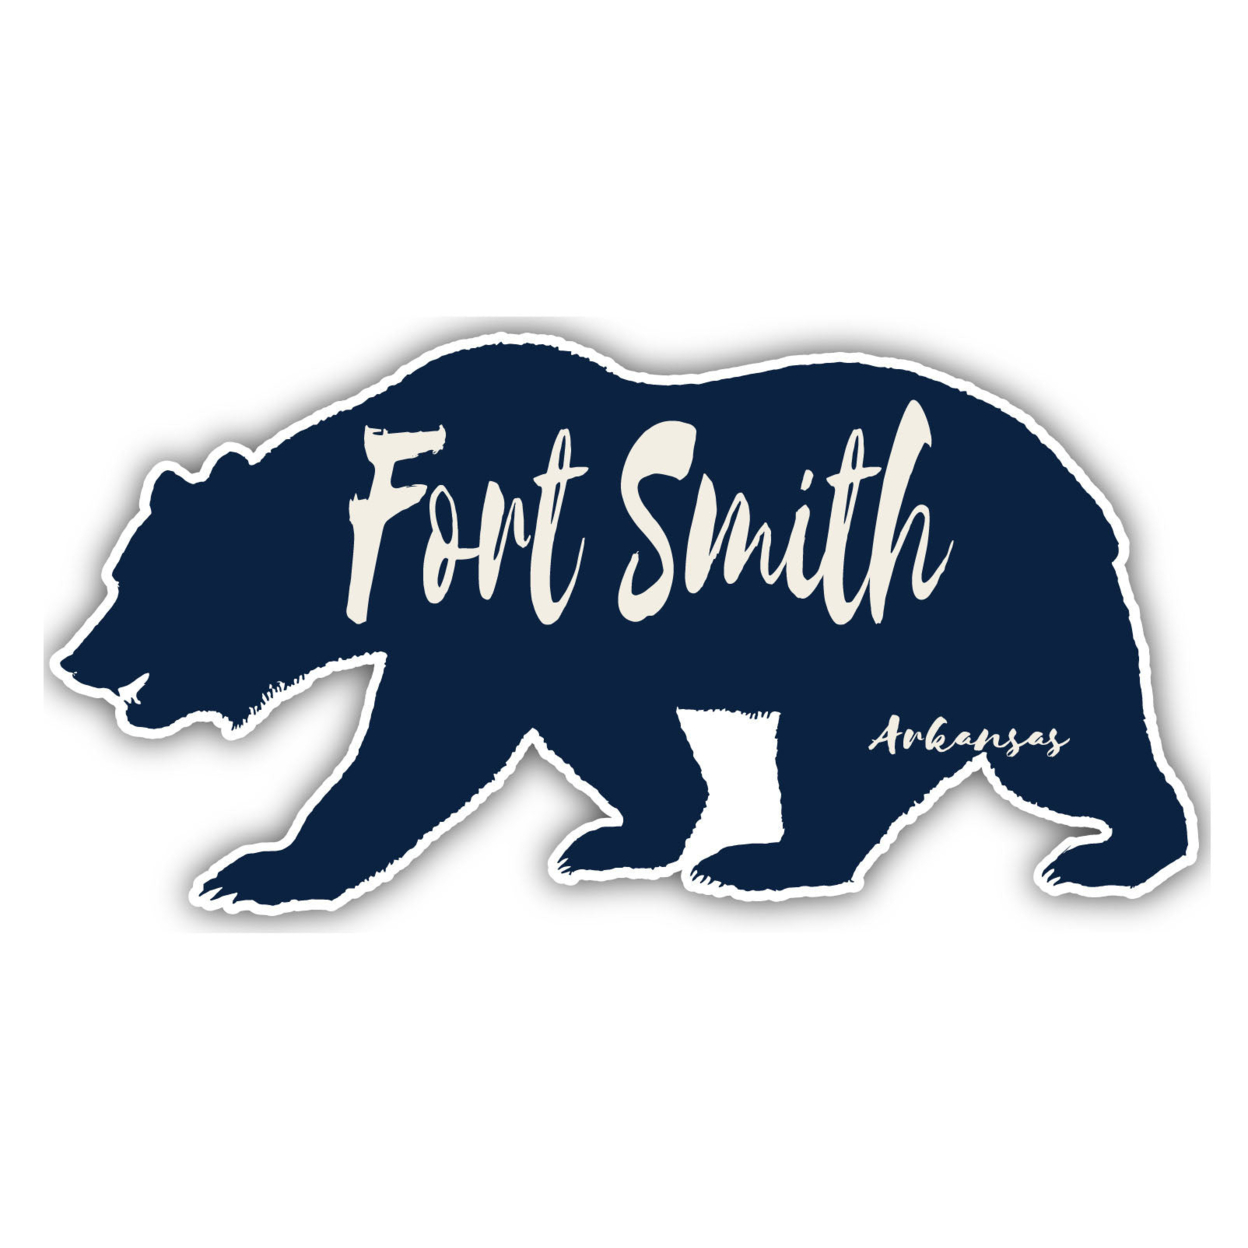 Fort Smith Arkansas Souvenir Decorative Stickers (Choose Theme And Size) - 4-Pack, 2-Inch, Bear